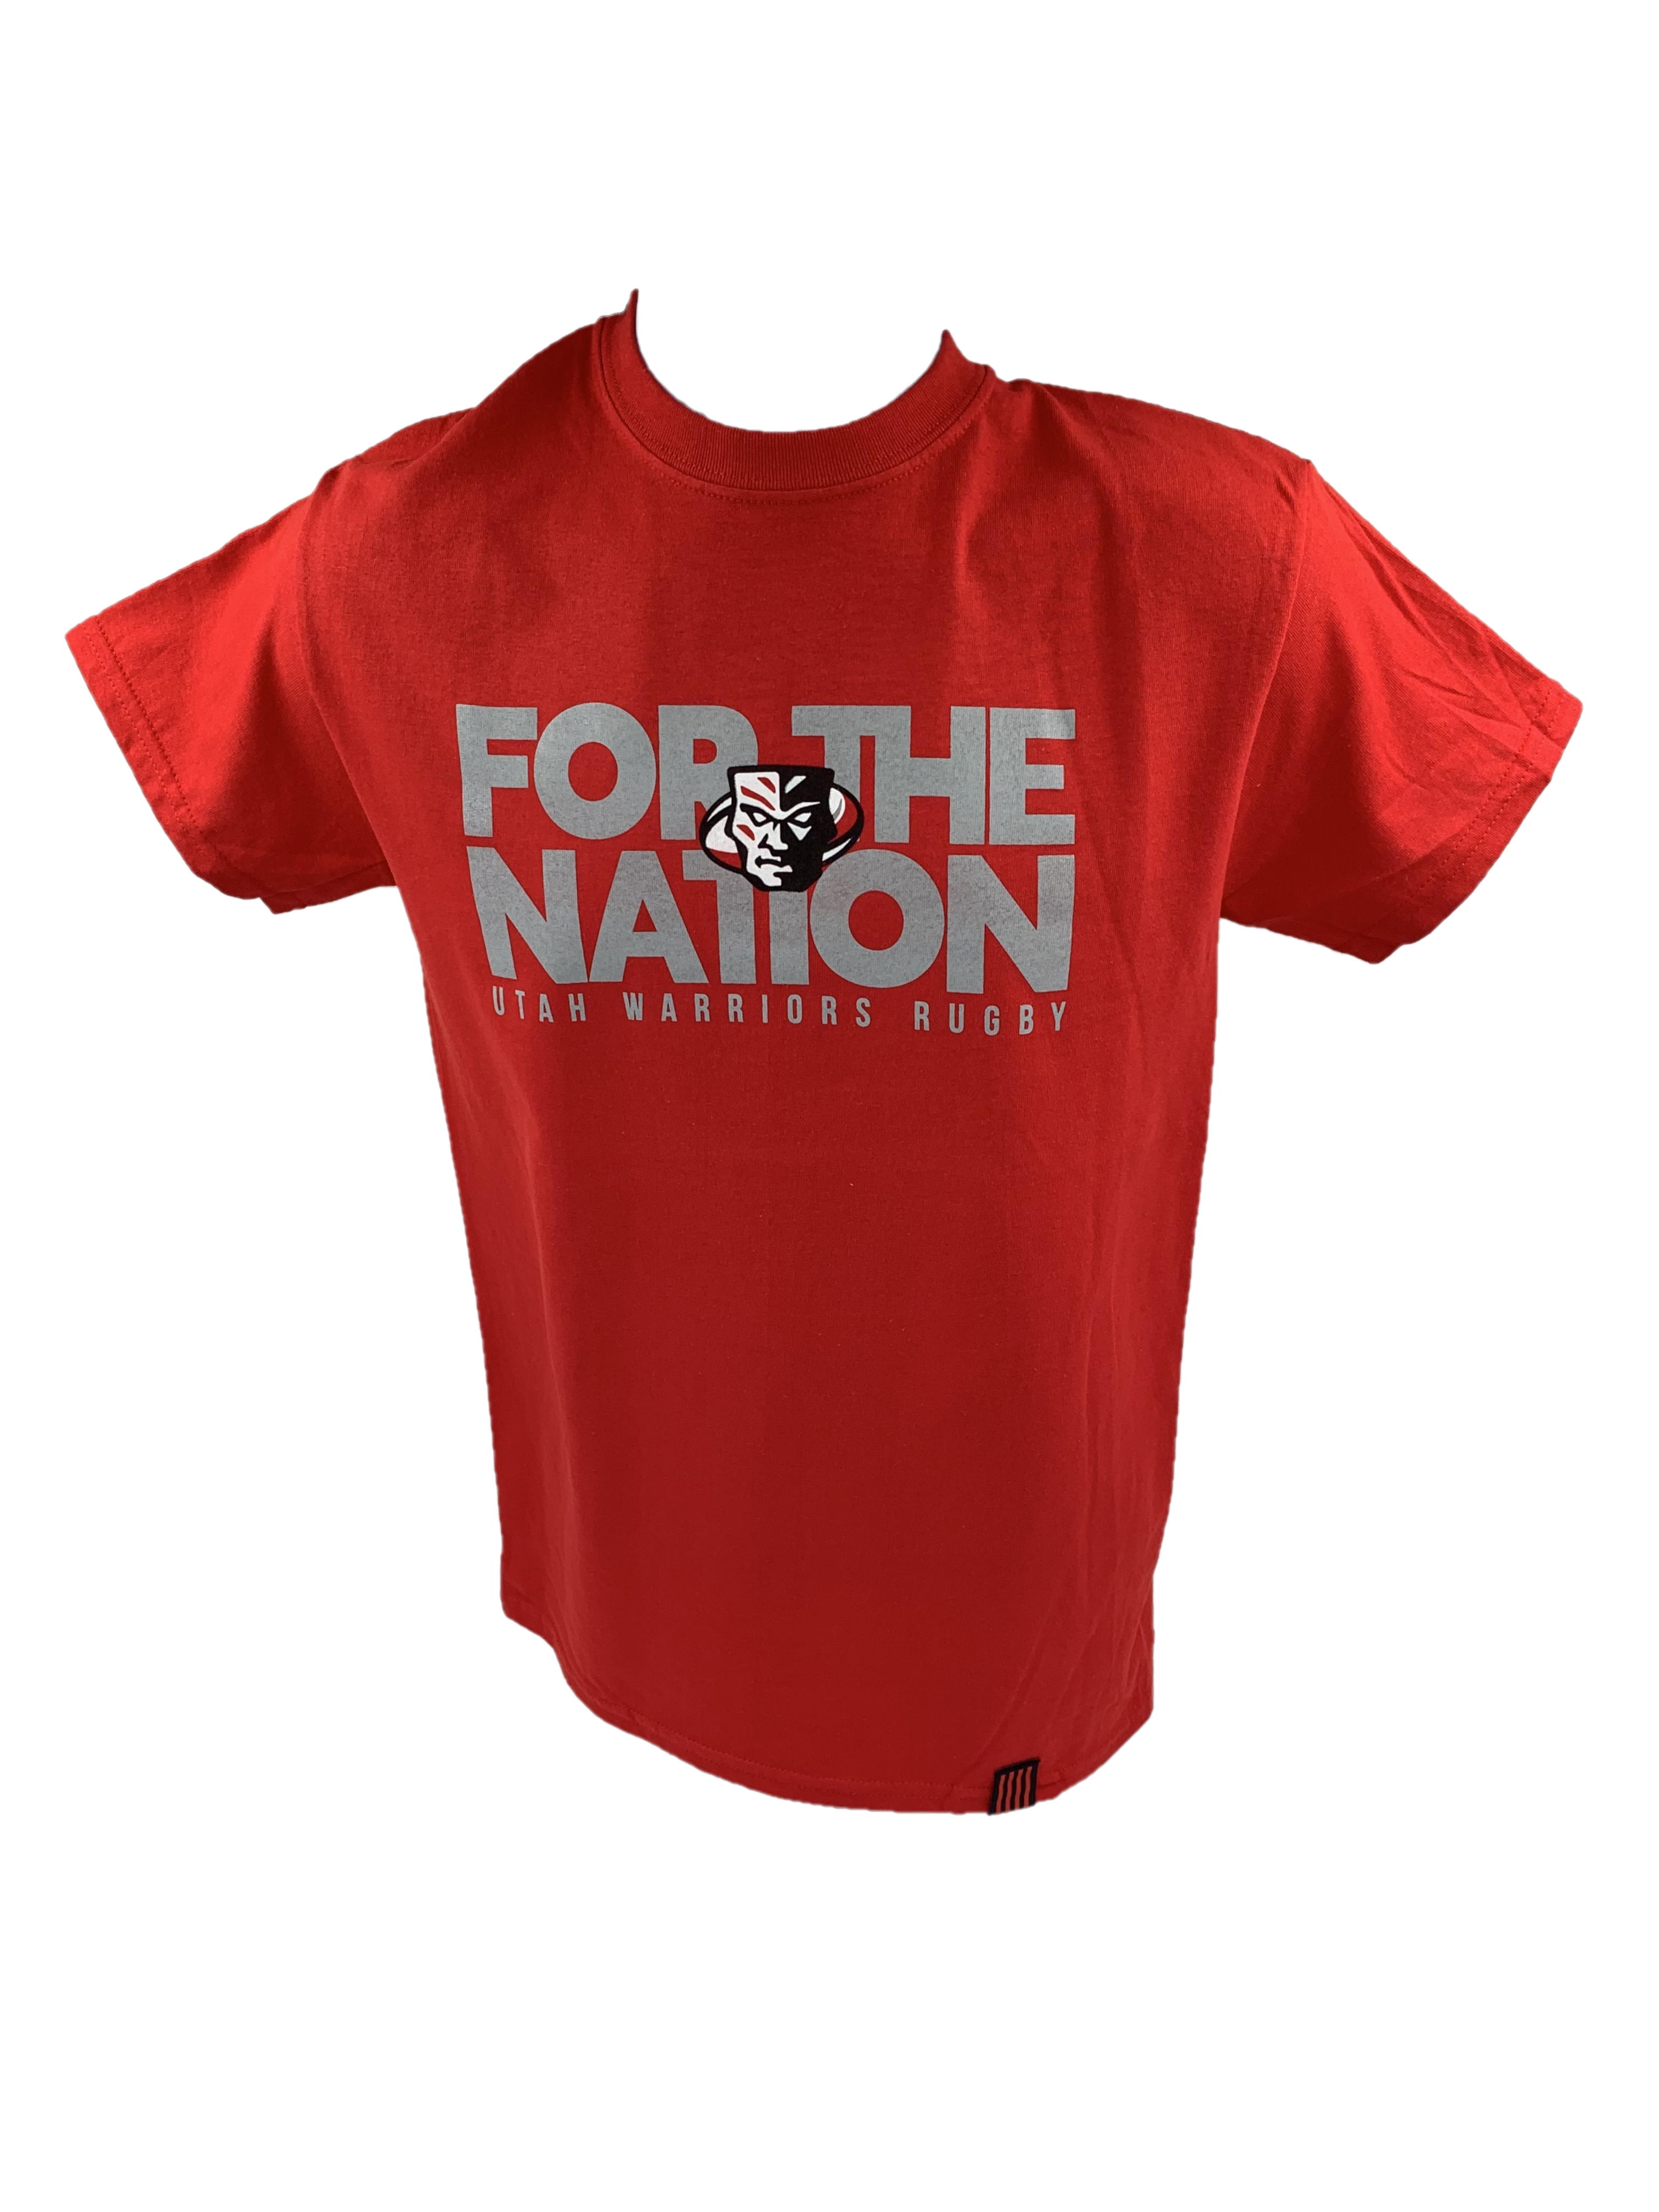 For the Nation Tee - Utah Warriors Rugby